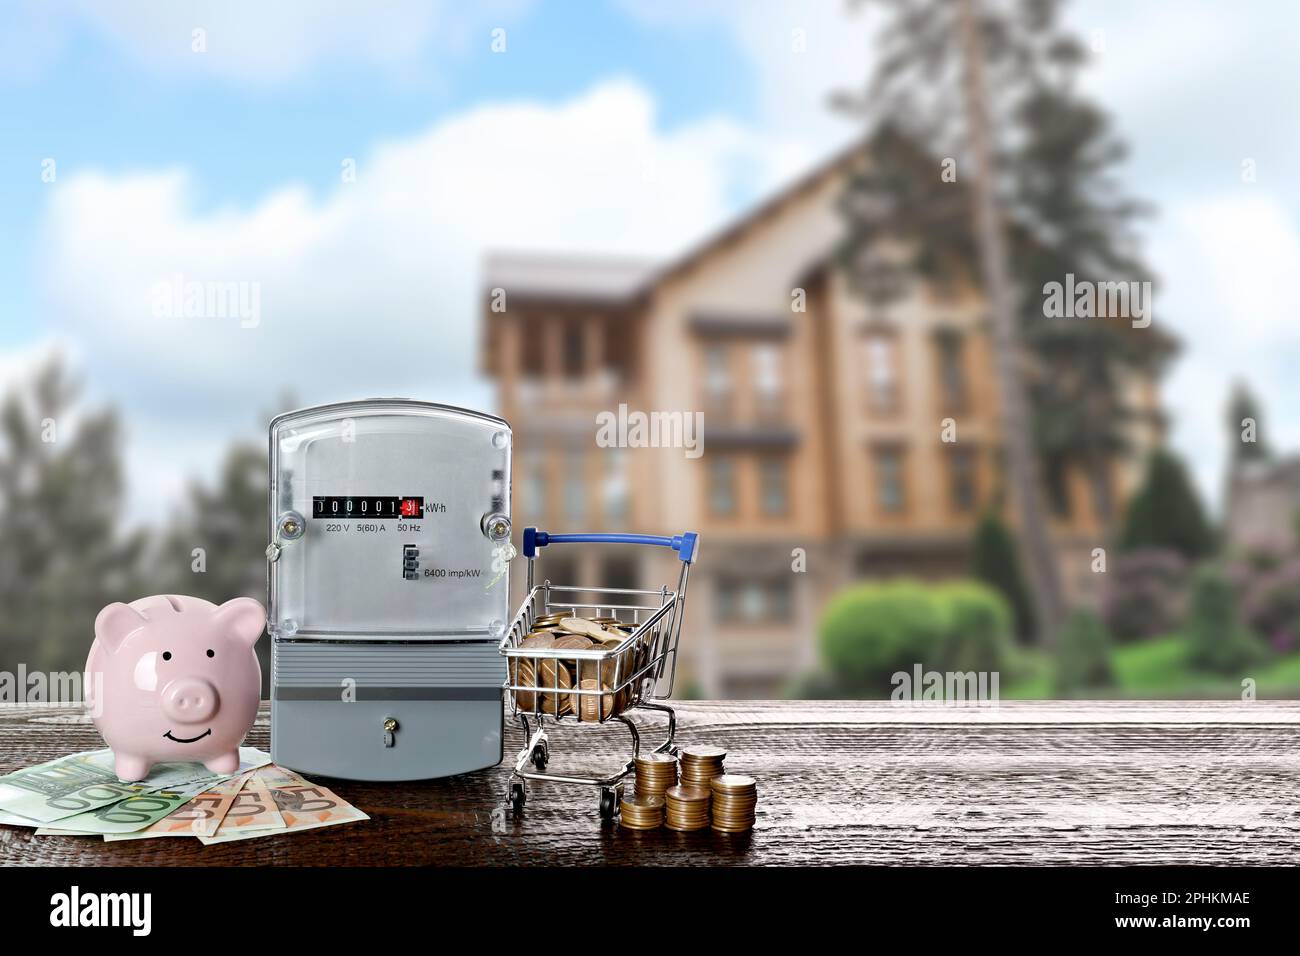 Electricity meter, piggy bank and small shopping cart with money on wooden table against blurred view of beautiful house Stock Photo